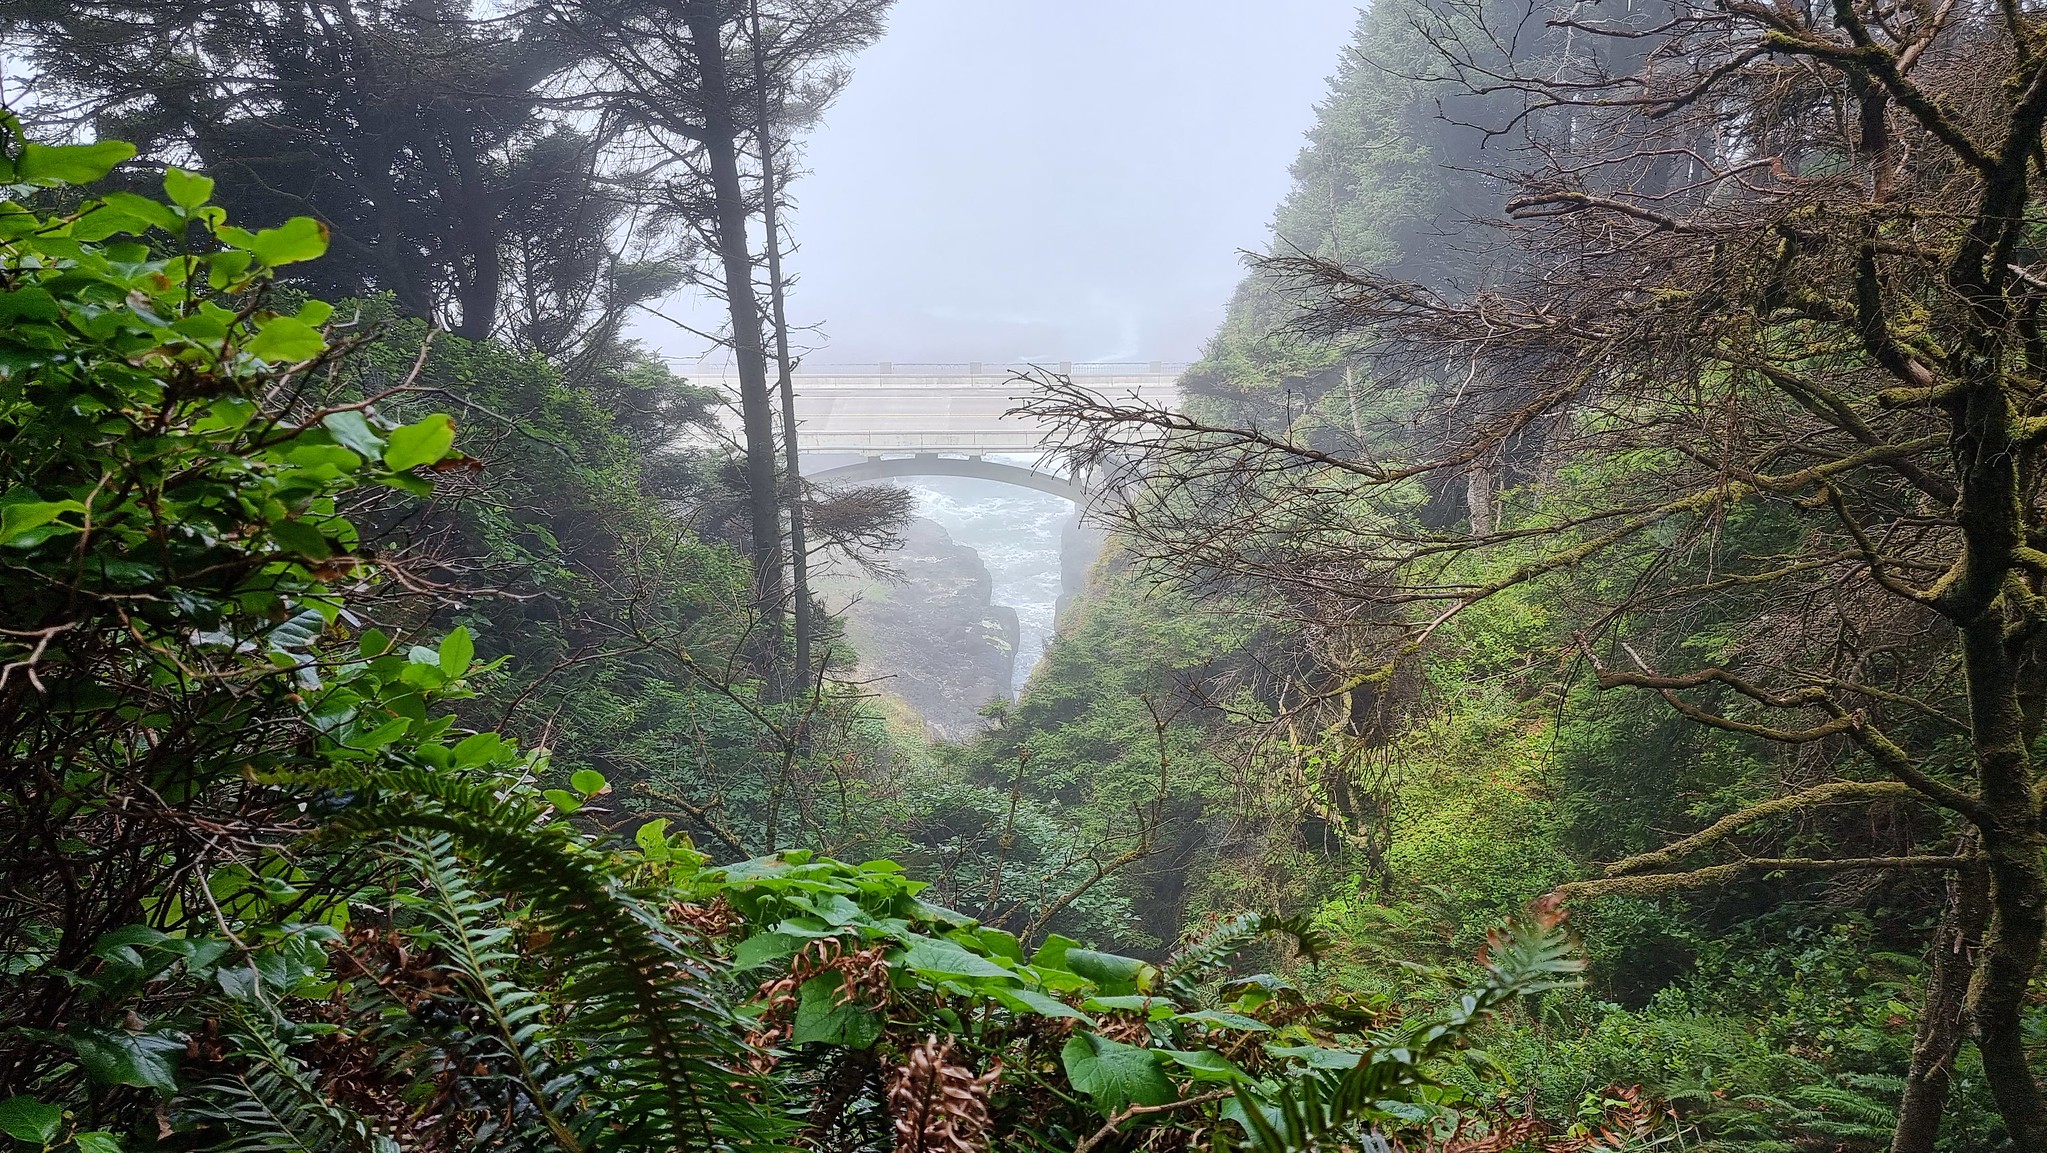 A little misty on the way back to the Cape Perpetua Visitors Center near Yachats